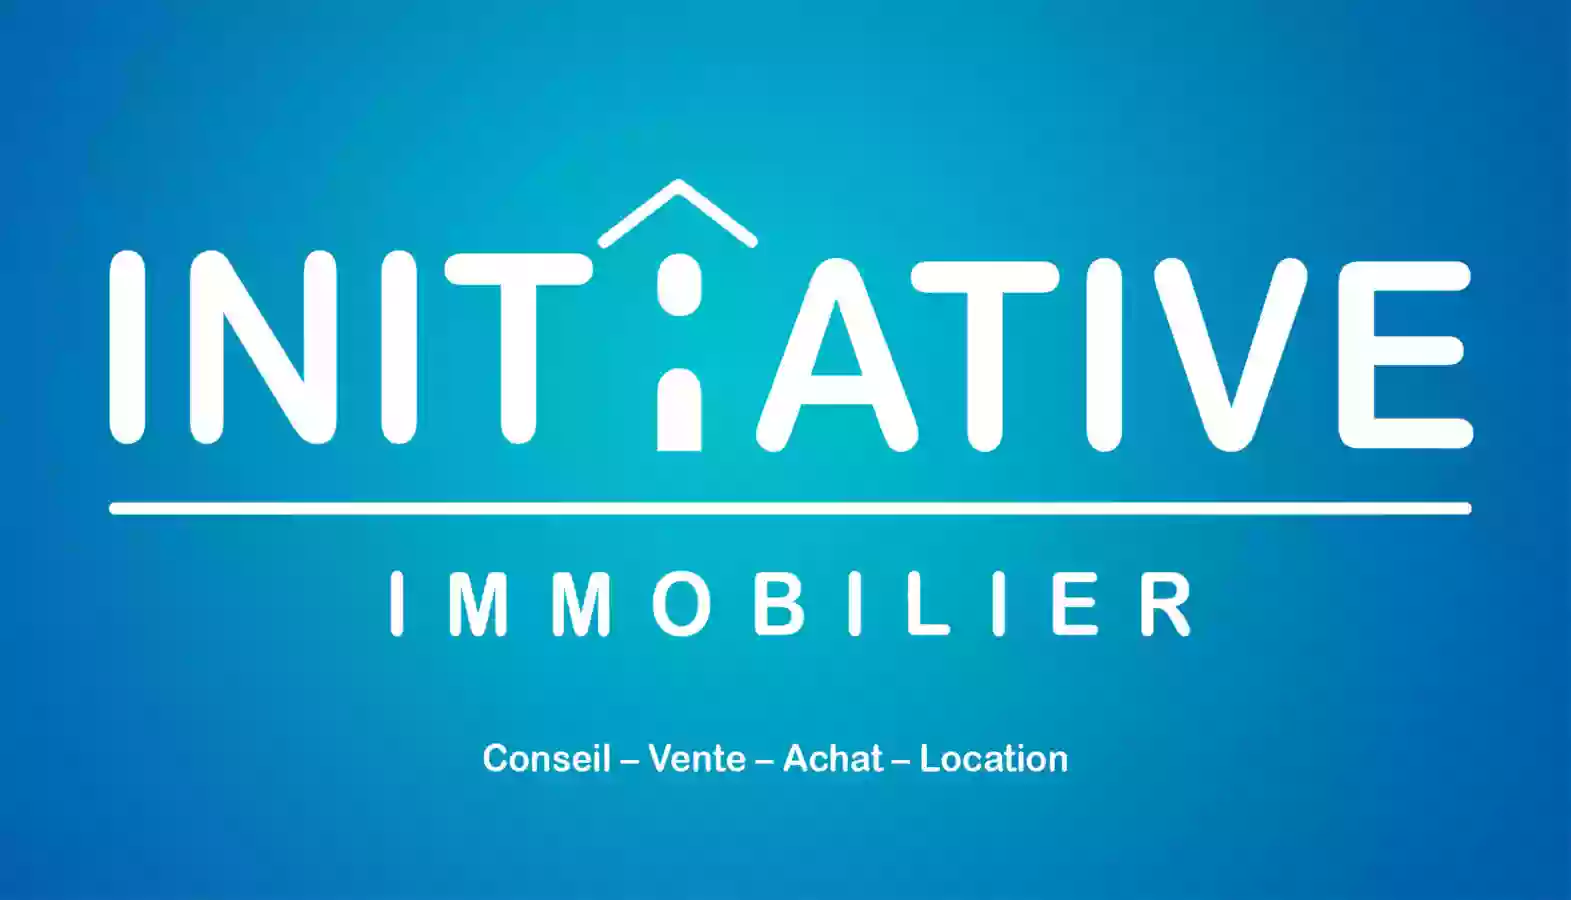 Initiative immobilier